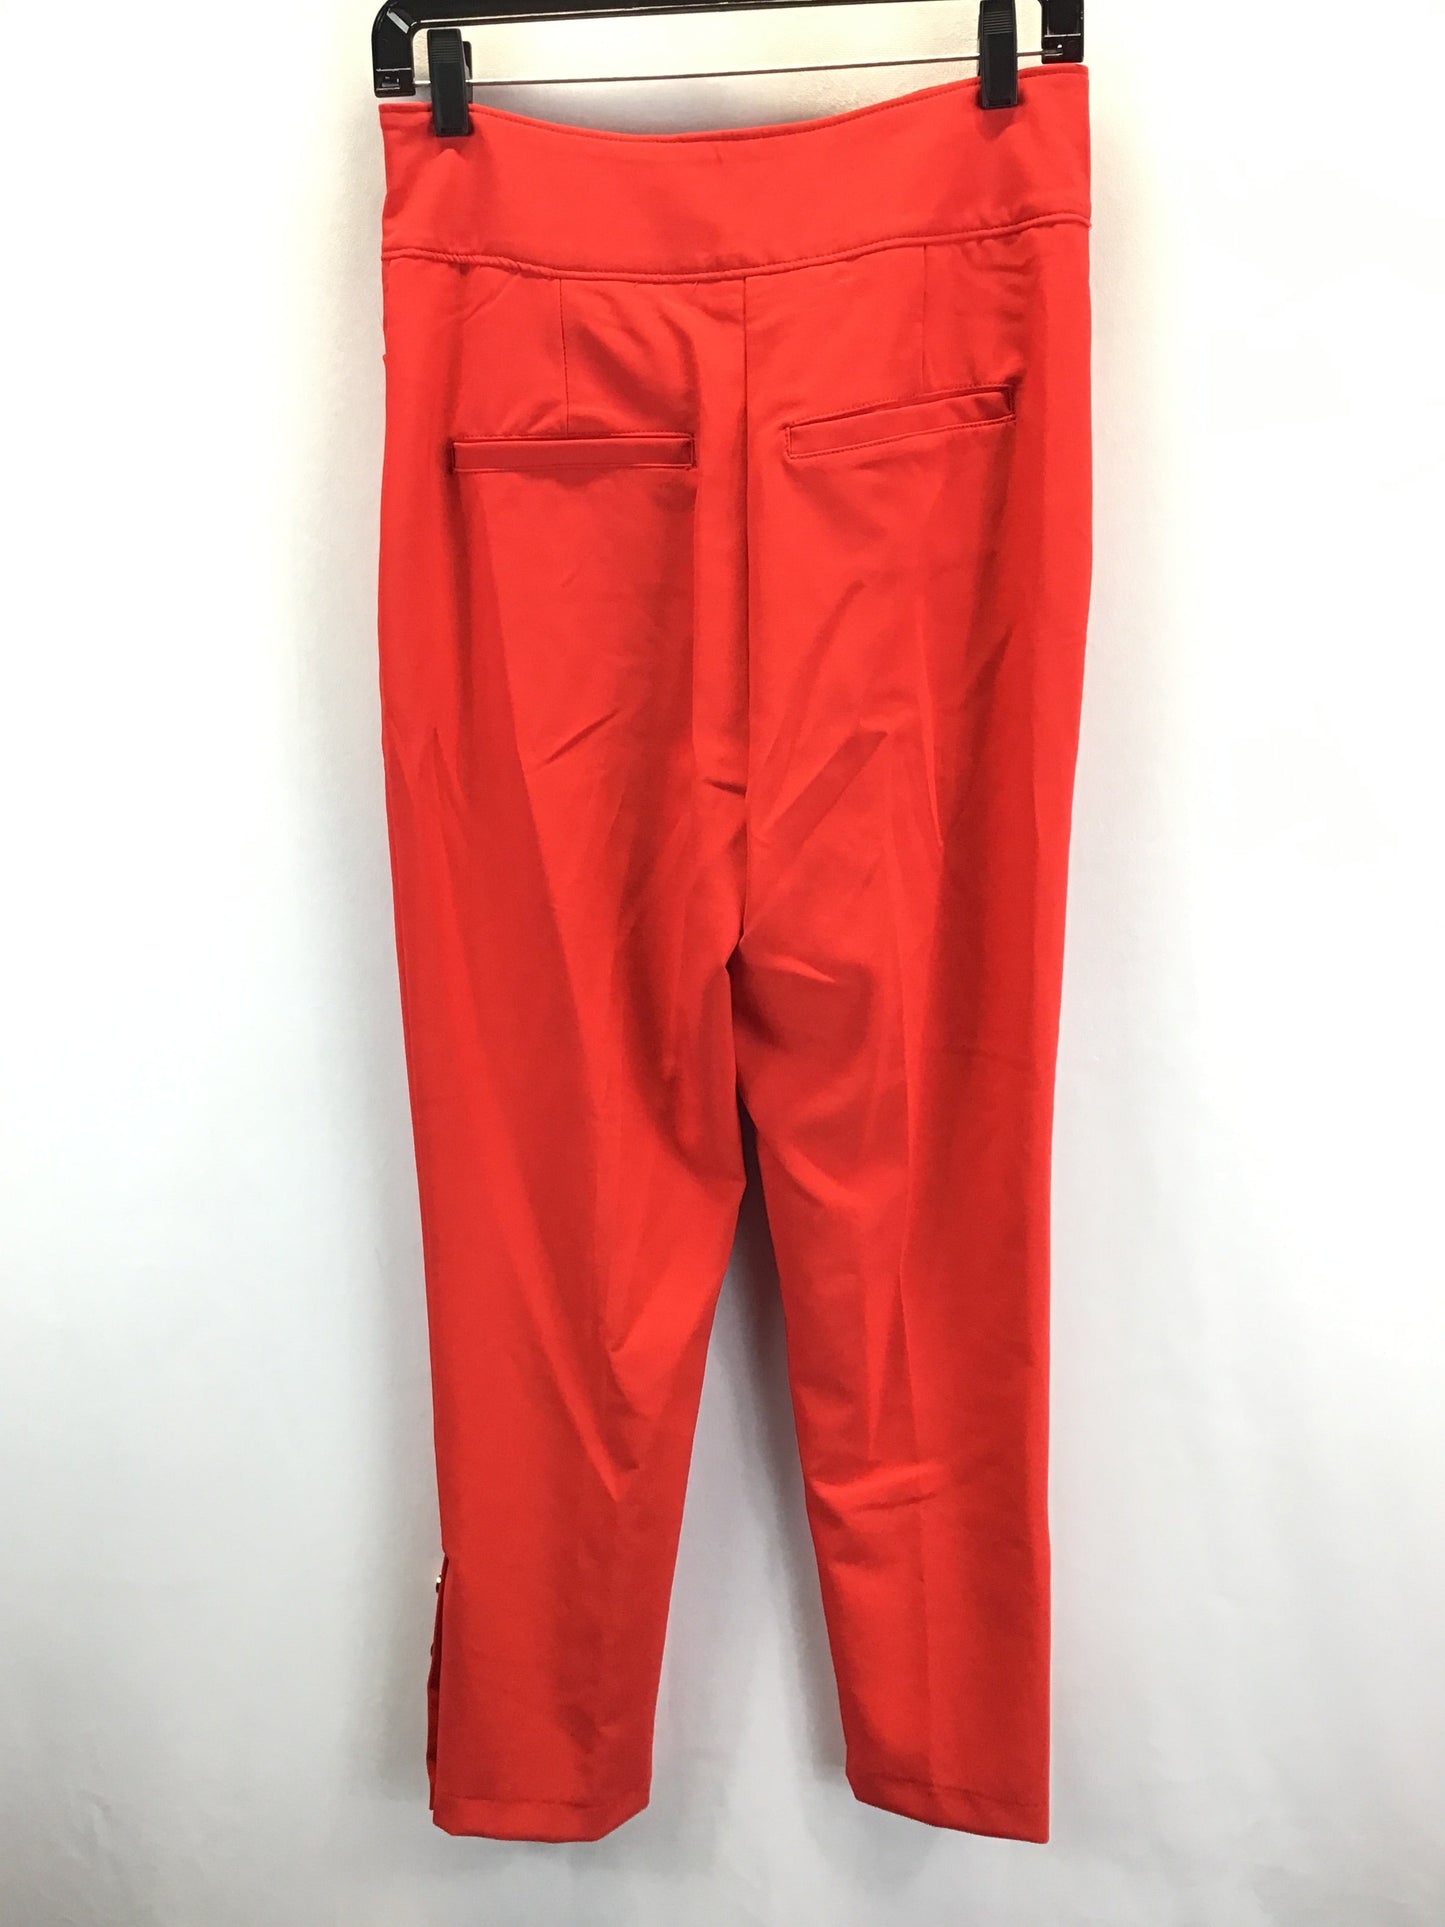 Red Pants Other New York And Co, Size 4